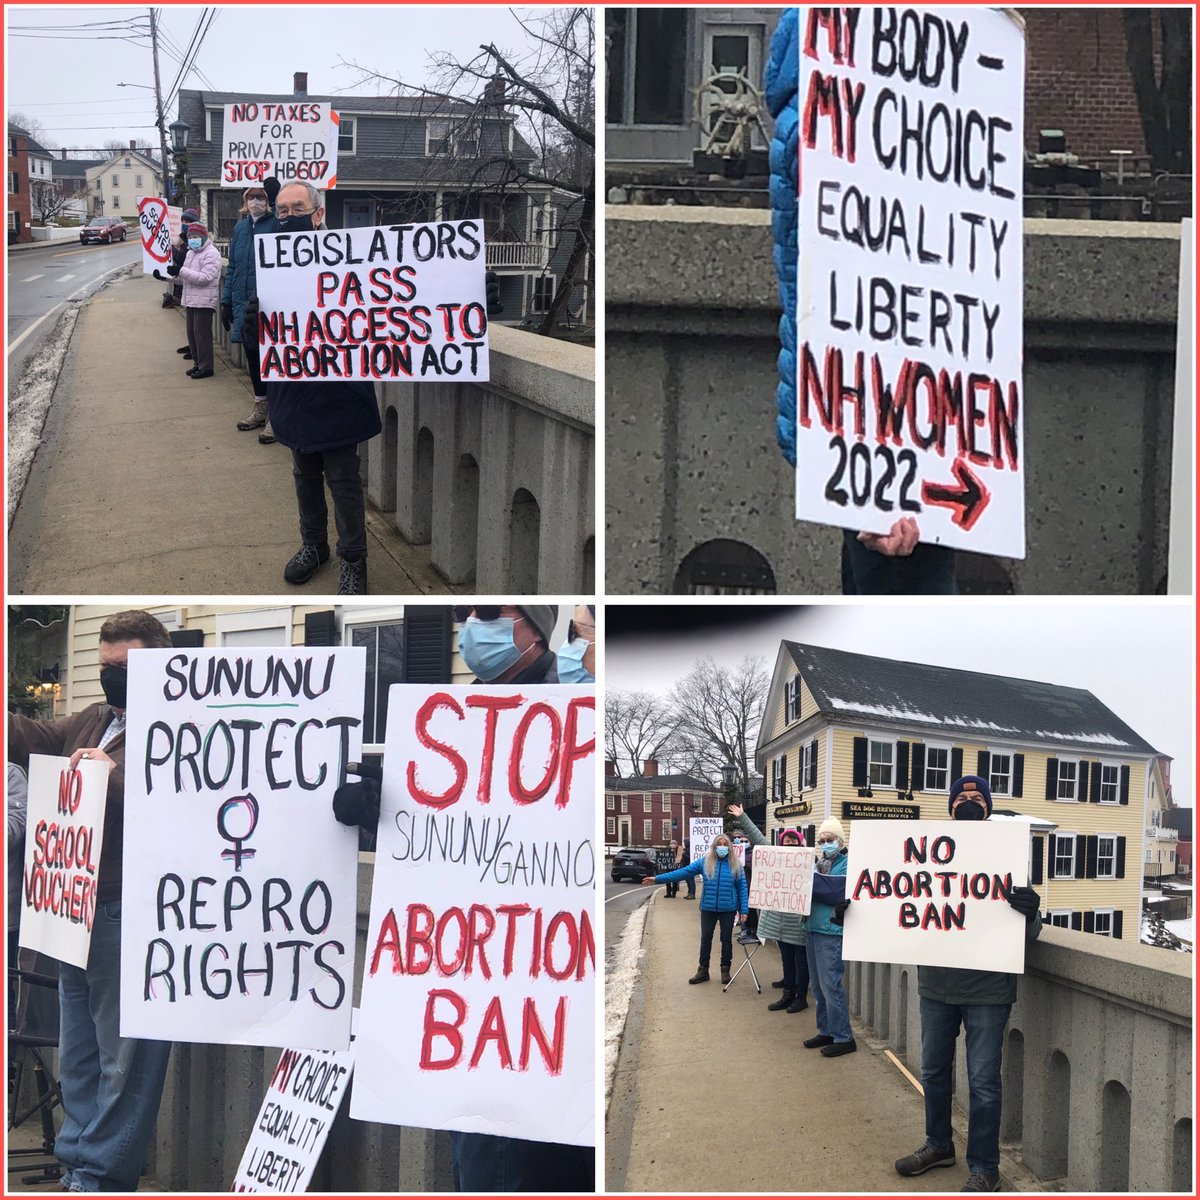 Join the Exeter Dems and our friends on the High Street Bridge this Fri. Jan. 14, 3-4 PM to support the Access to Abortion-Care Act (SB436) codifying current abortion rights into the Constitution and repealing the present abortion ban (SB399).